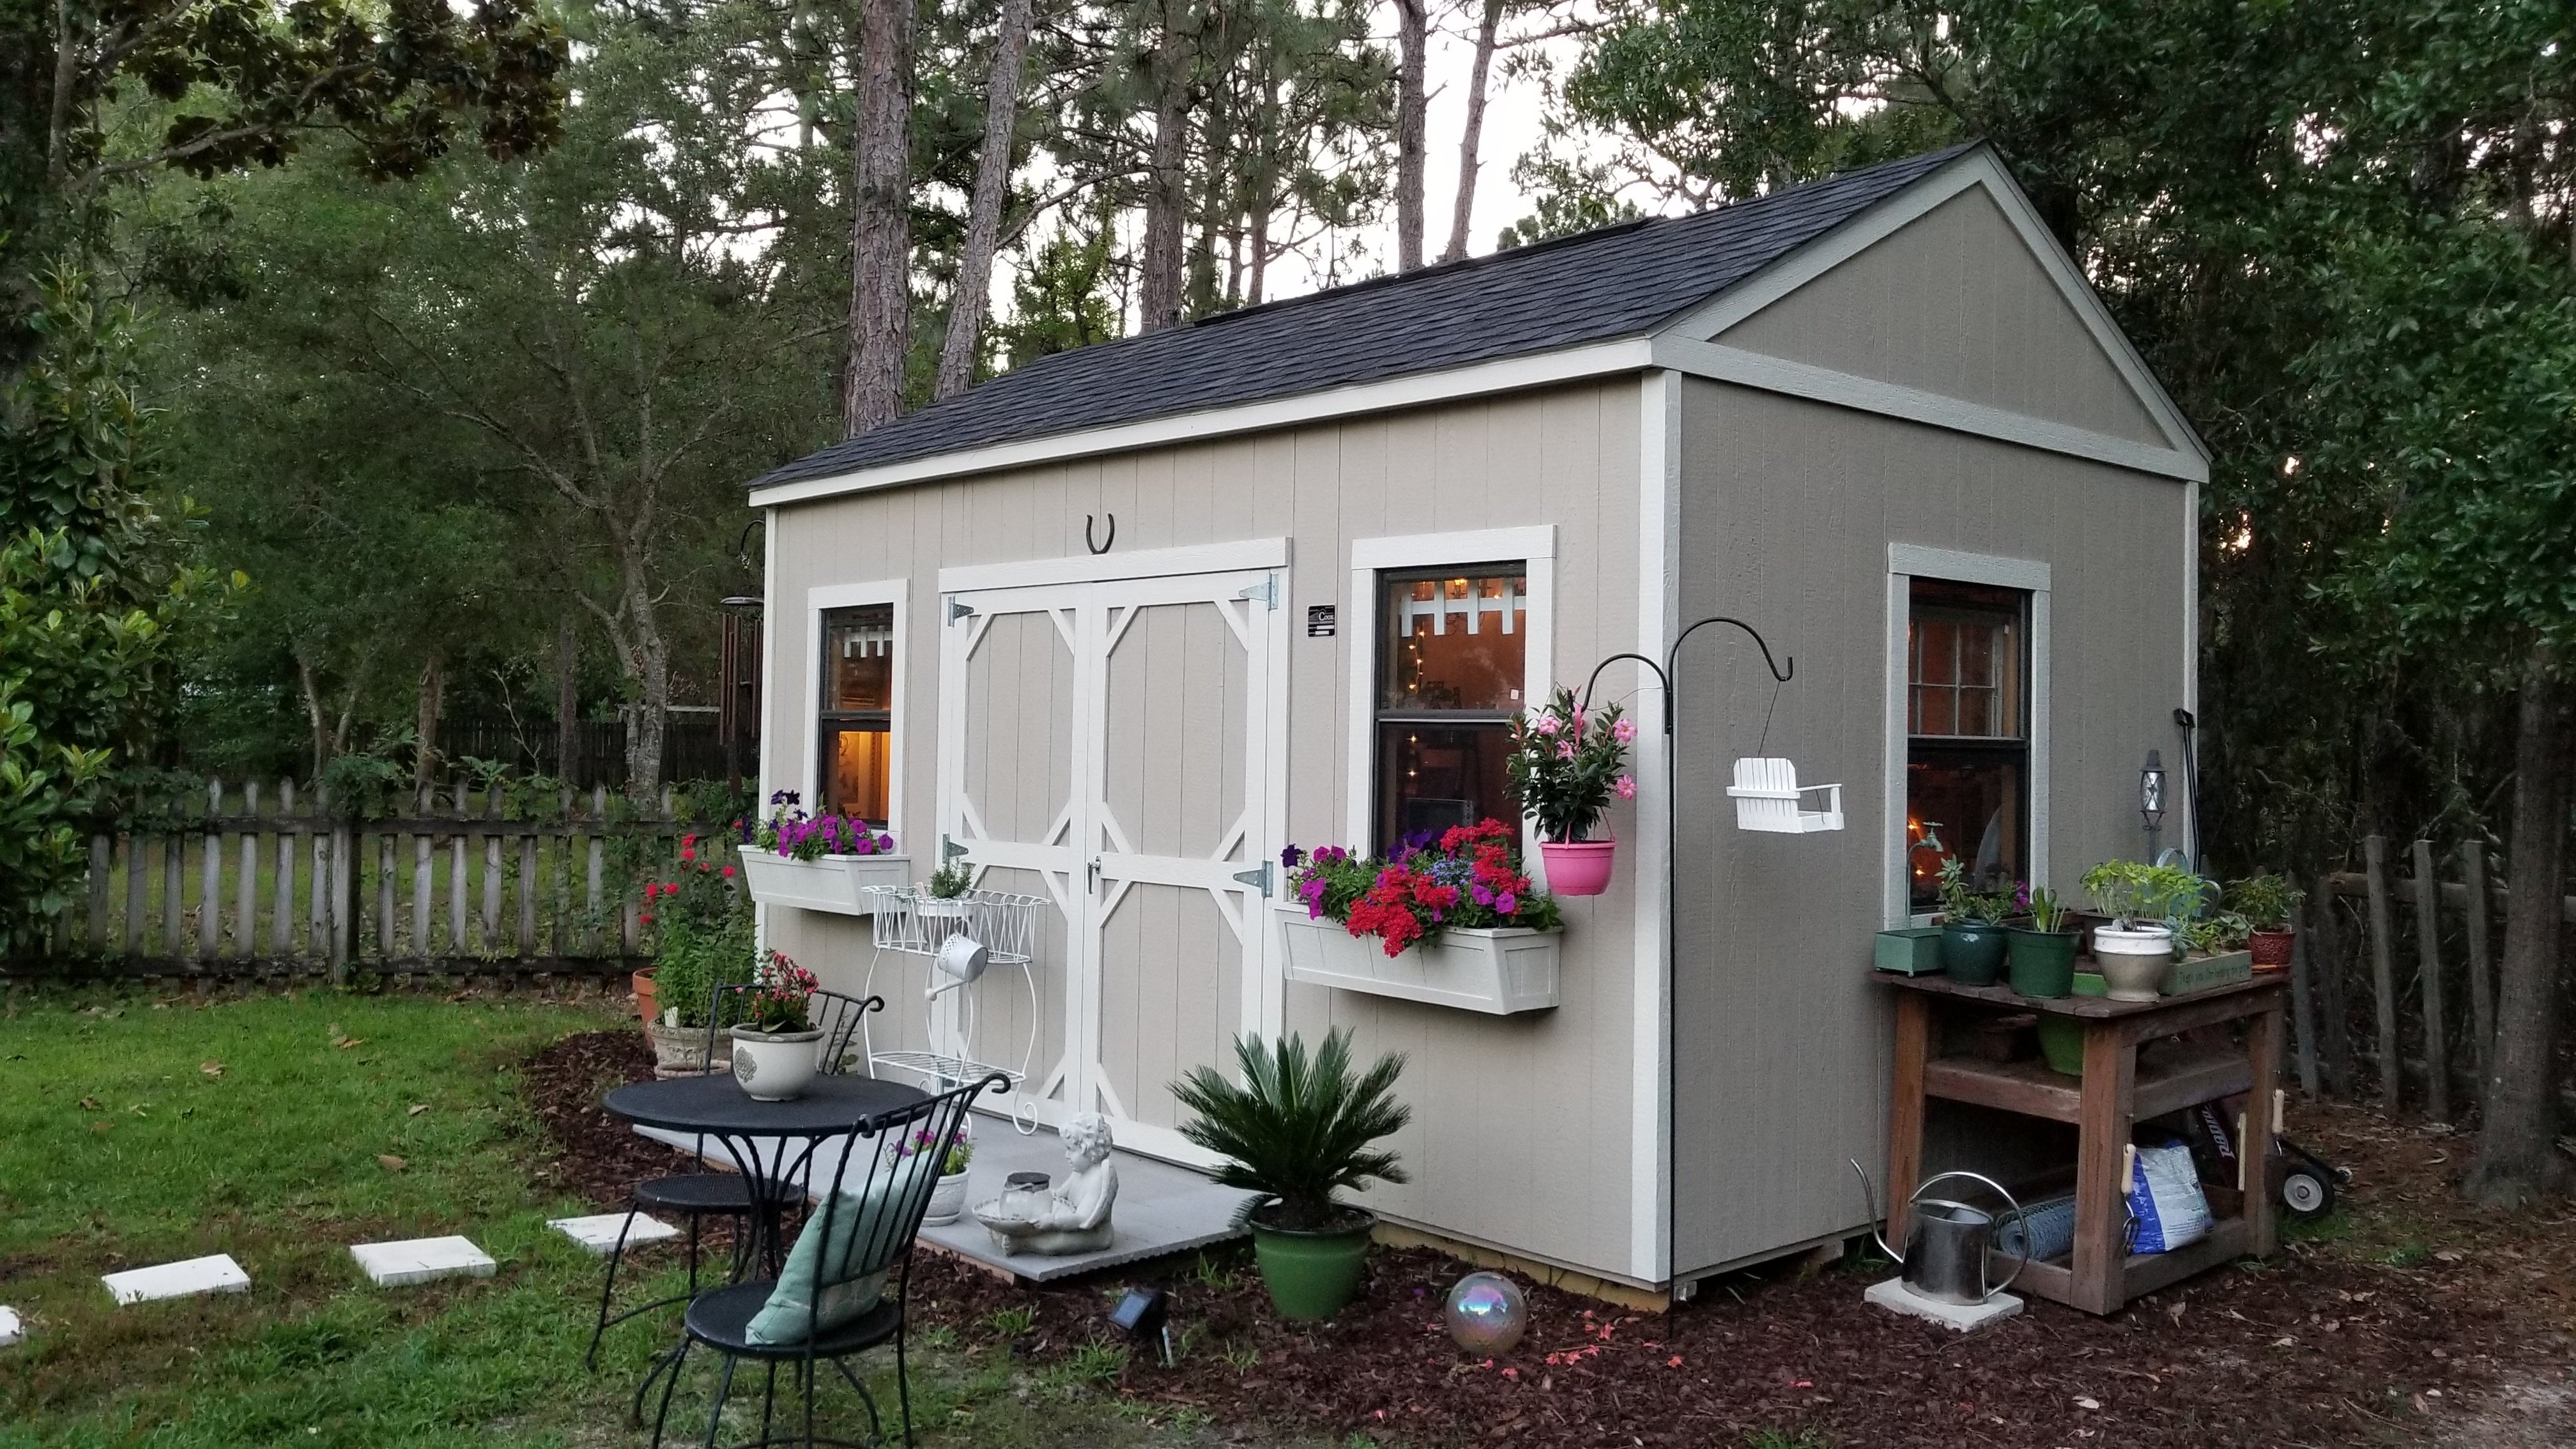 Utility Shed Turned Into a She Shed